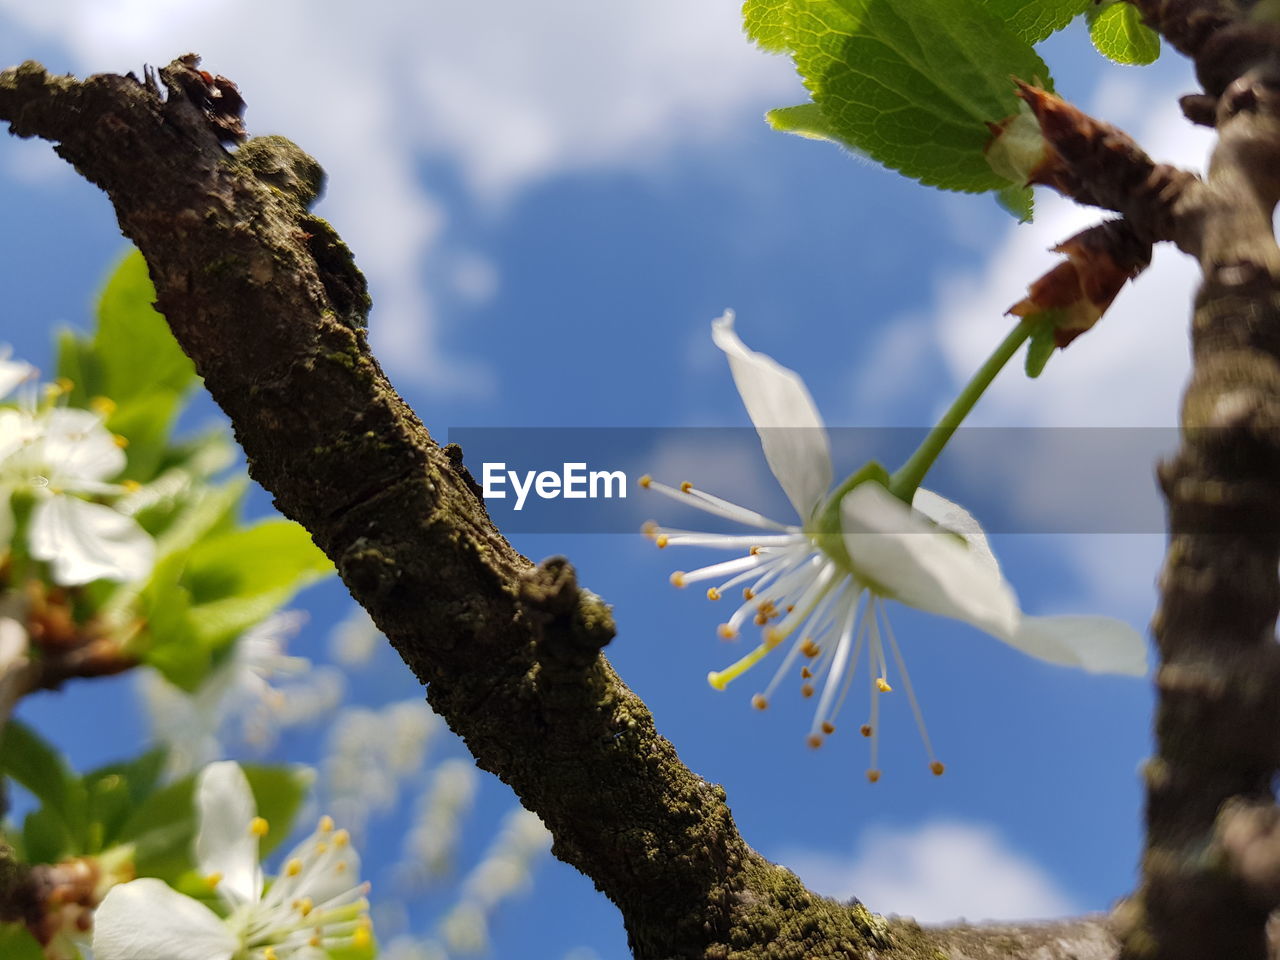 LOW ANGLE VIEW OF CHERRY BLOSSOM TREE AGAINST SKY